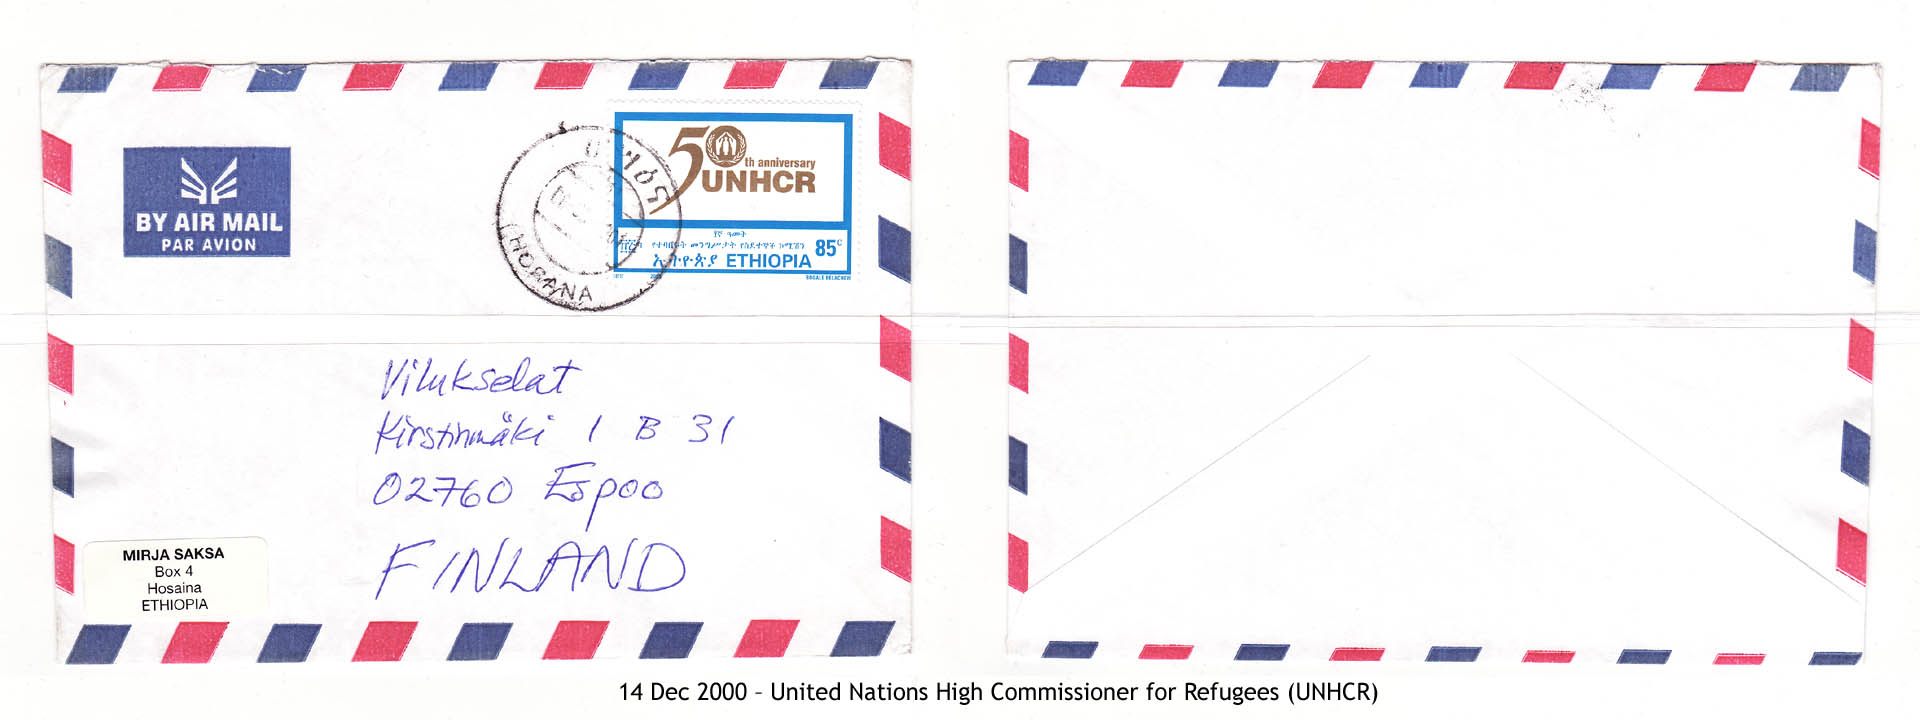 20001214 – United Nations High Commissioner for Refugees (UNHCR)